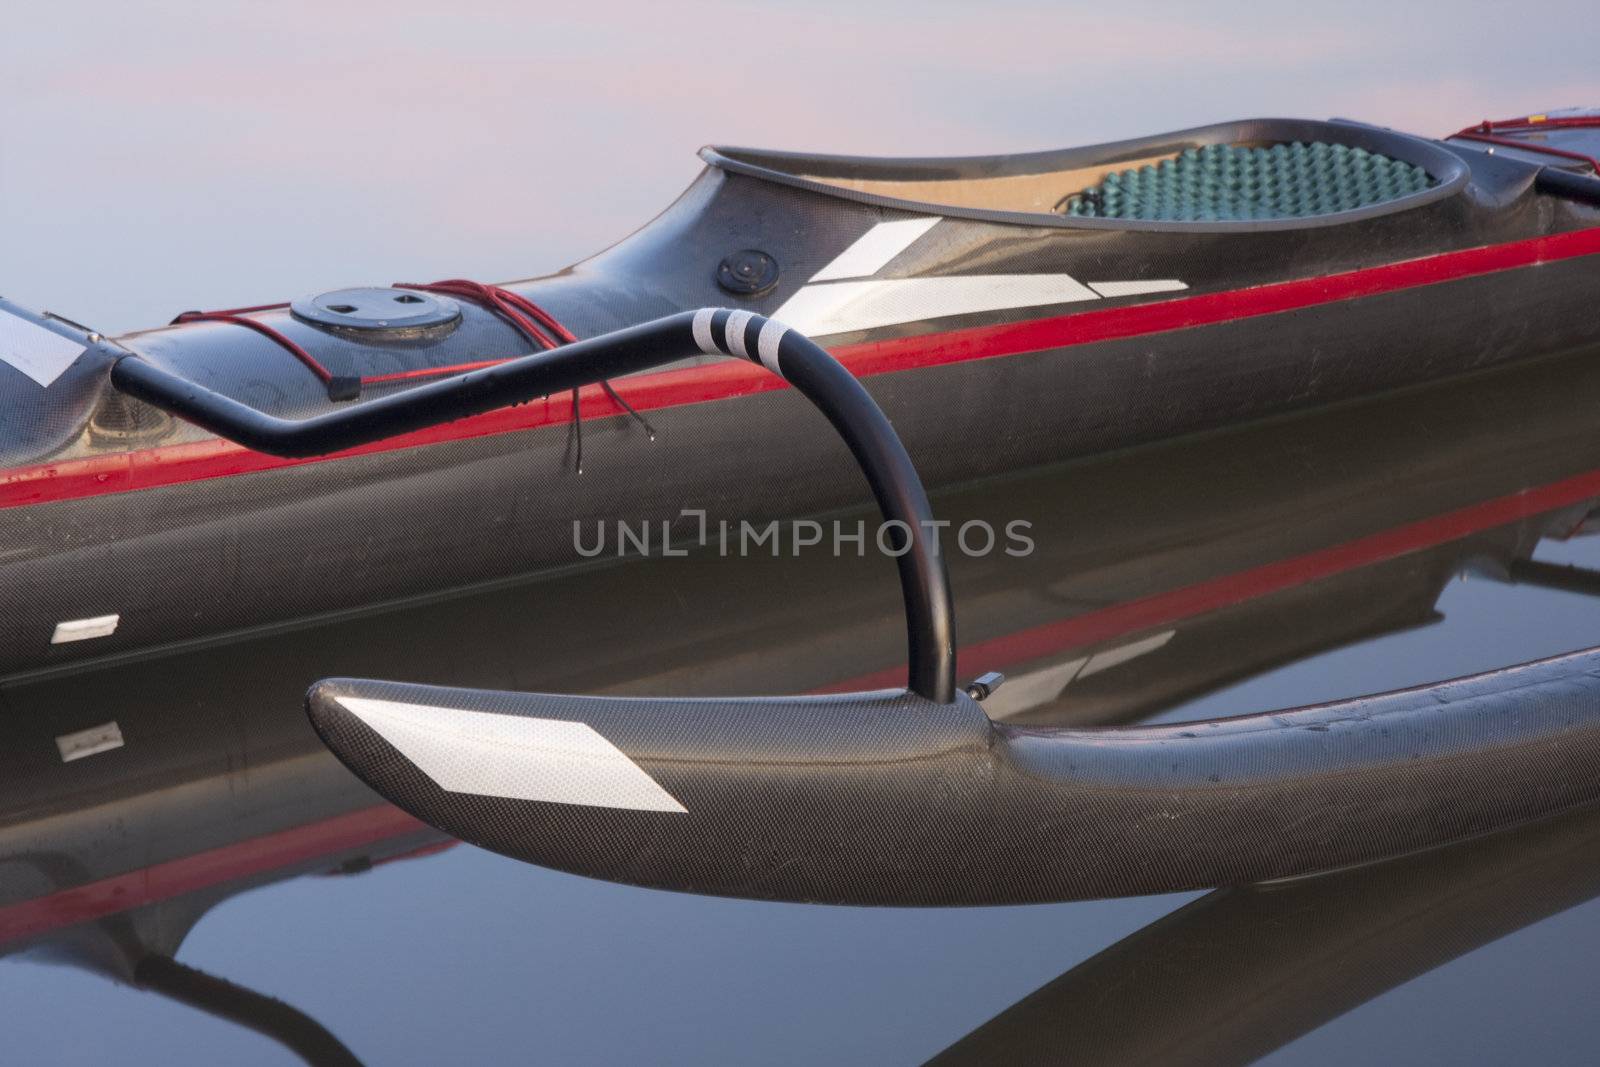 cockpit of racing outrigger canoe (black carbon fiber design) with ama in front on calm water with reflection